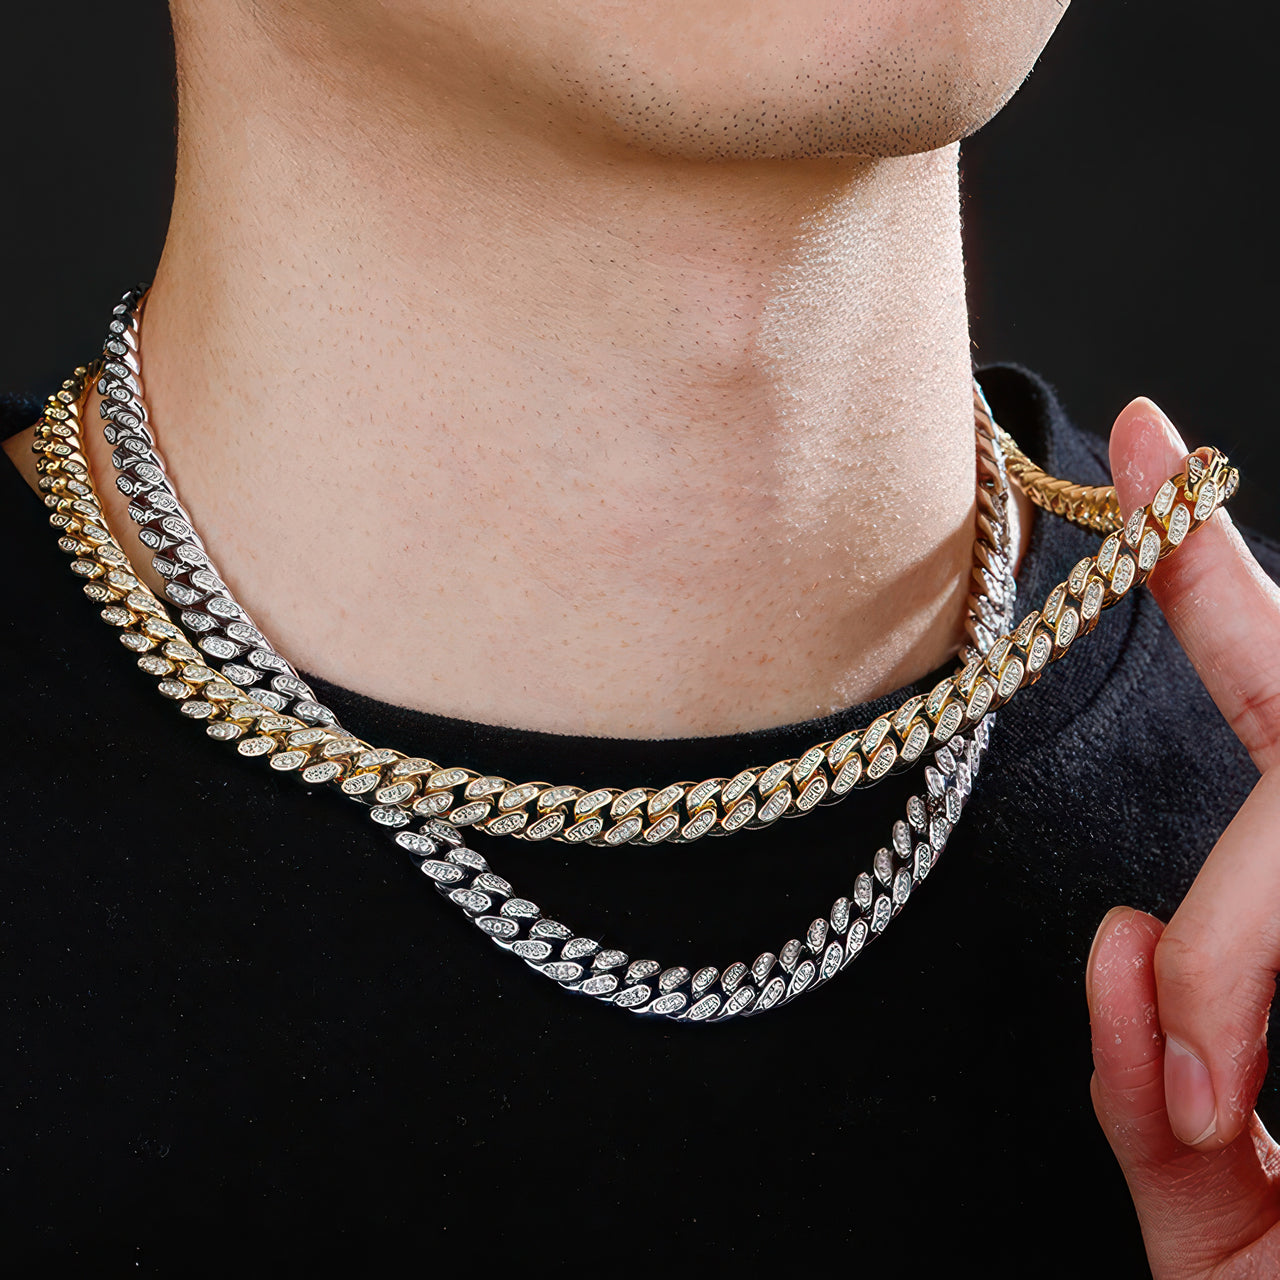 8mm Miami Cuban Link Chain - Different Drips